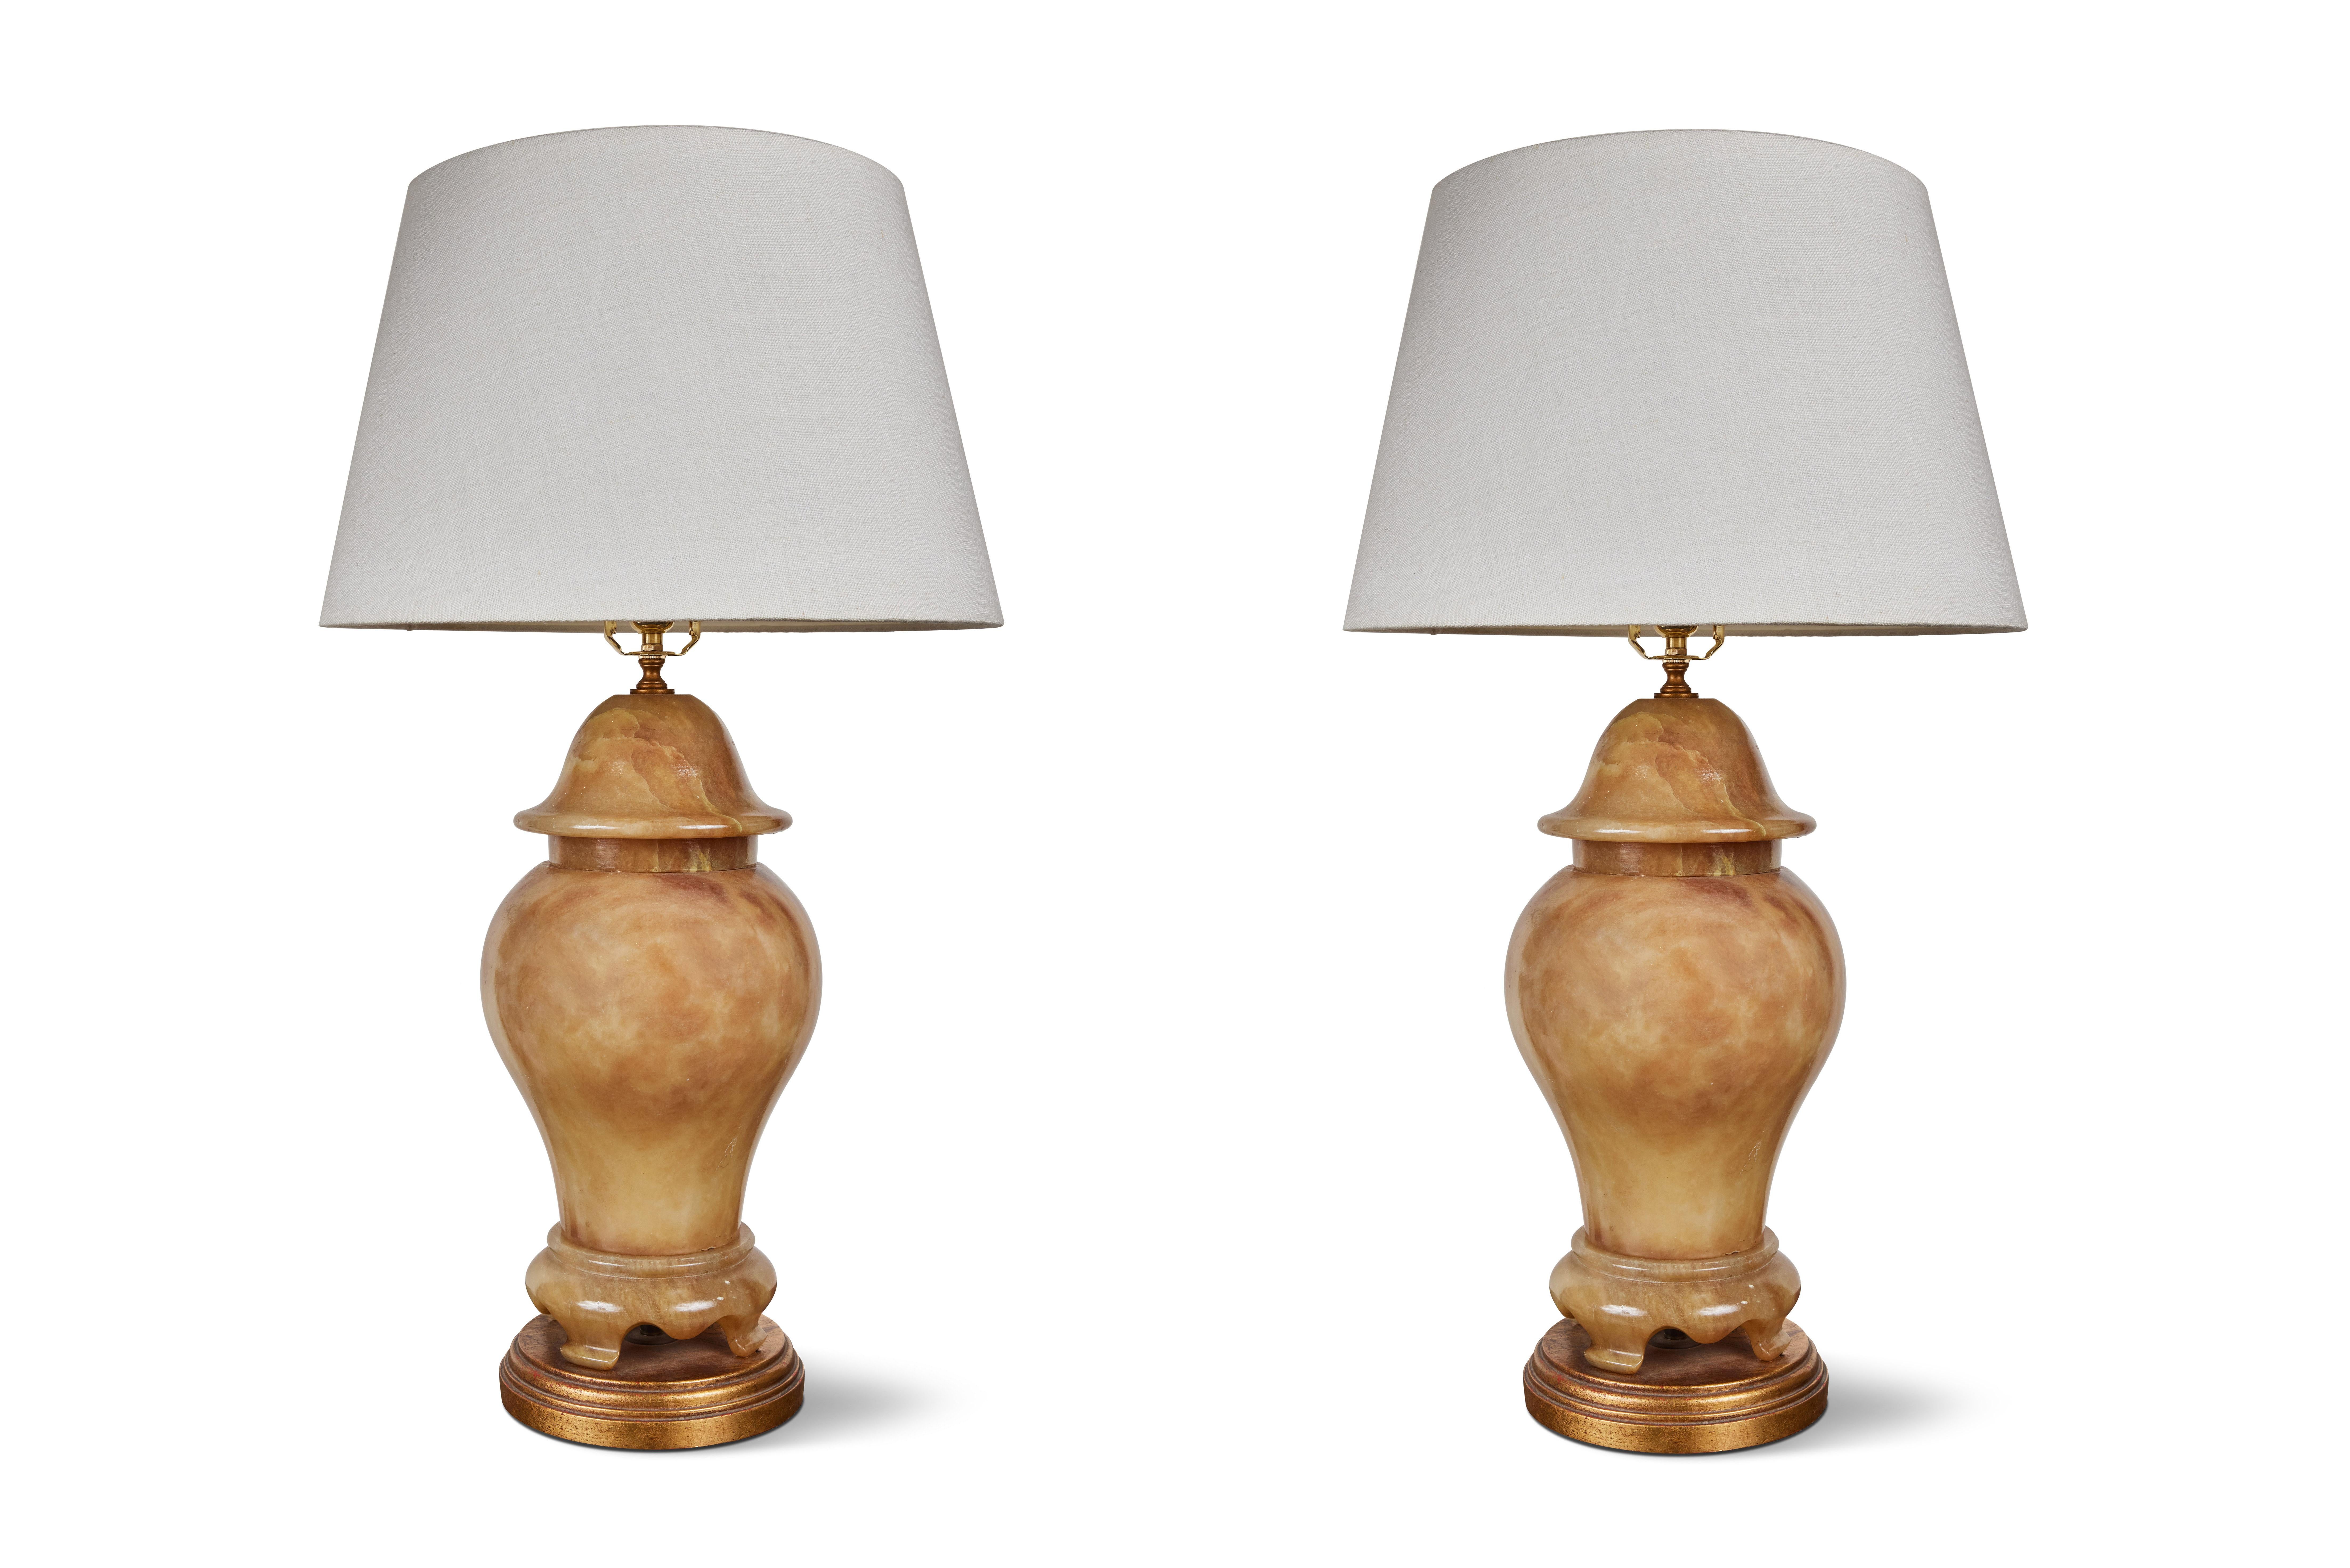 A pair of elegant, carved and polished, alabaster table lamps in the Chinoiserie taste. Each with a faux lid and a serpentine feet above a stepped, giltwood base. These dynamic lamps can be lit in three ways, including from within, as can be seen in